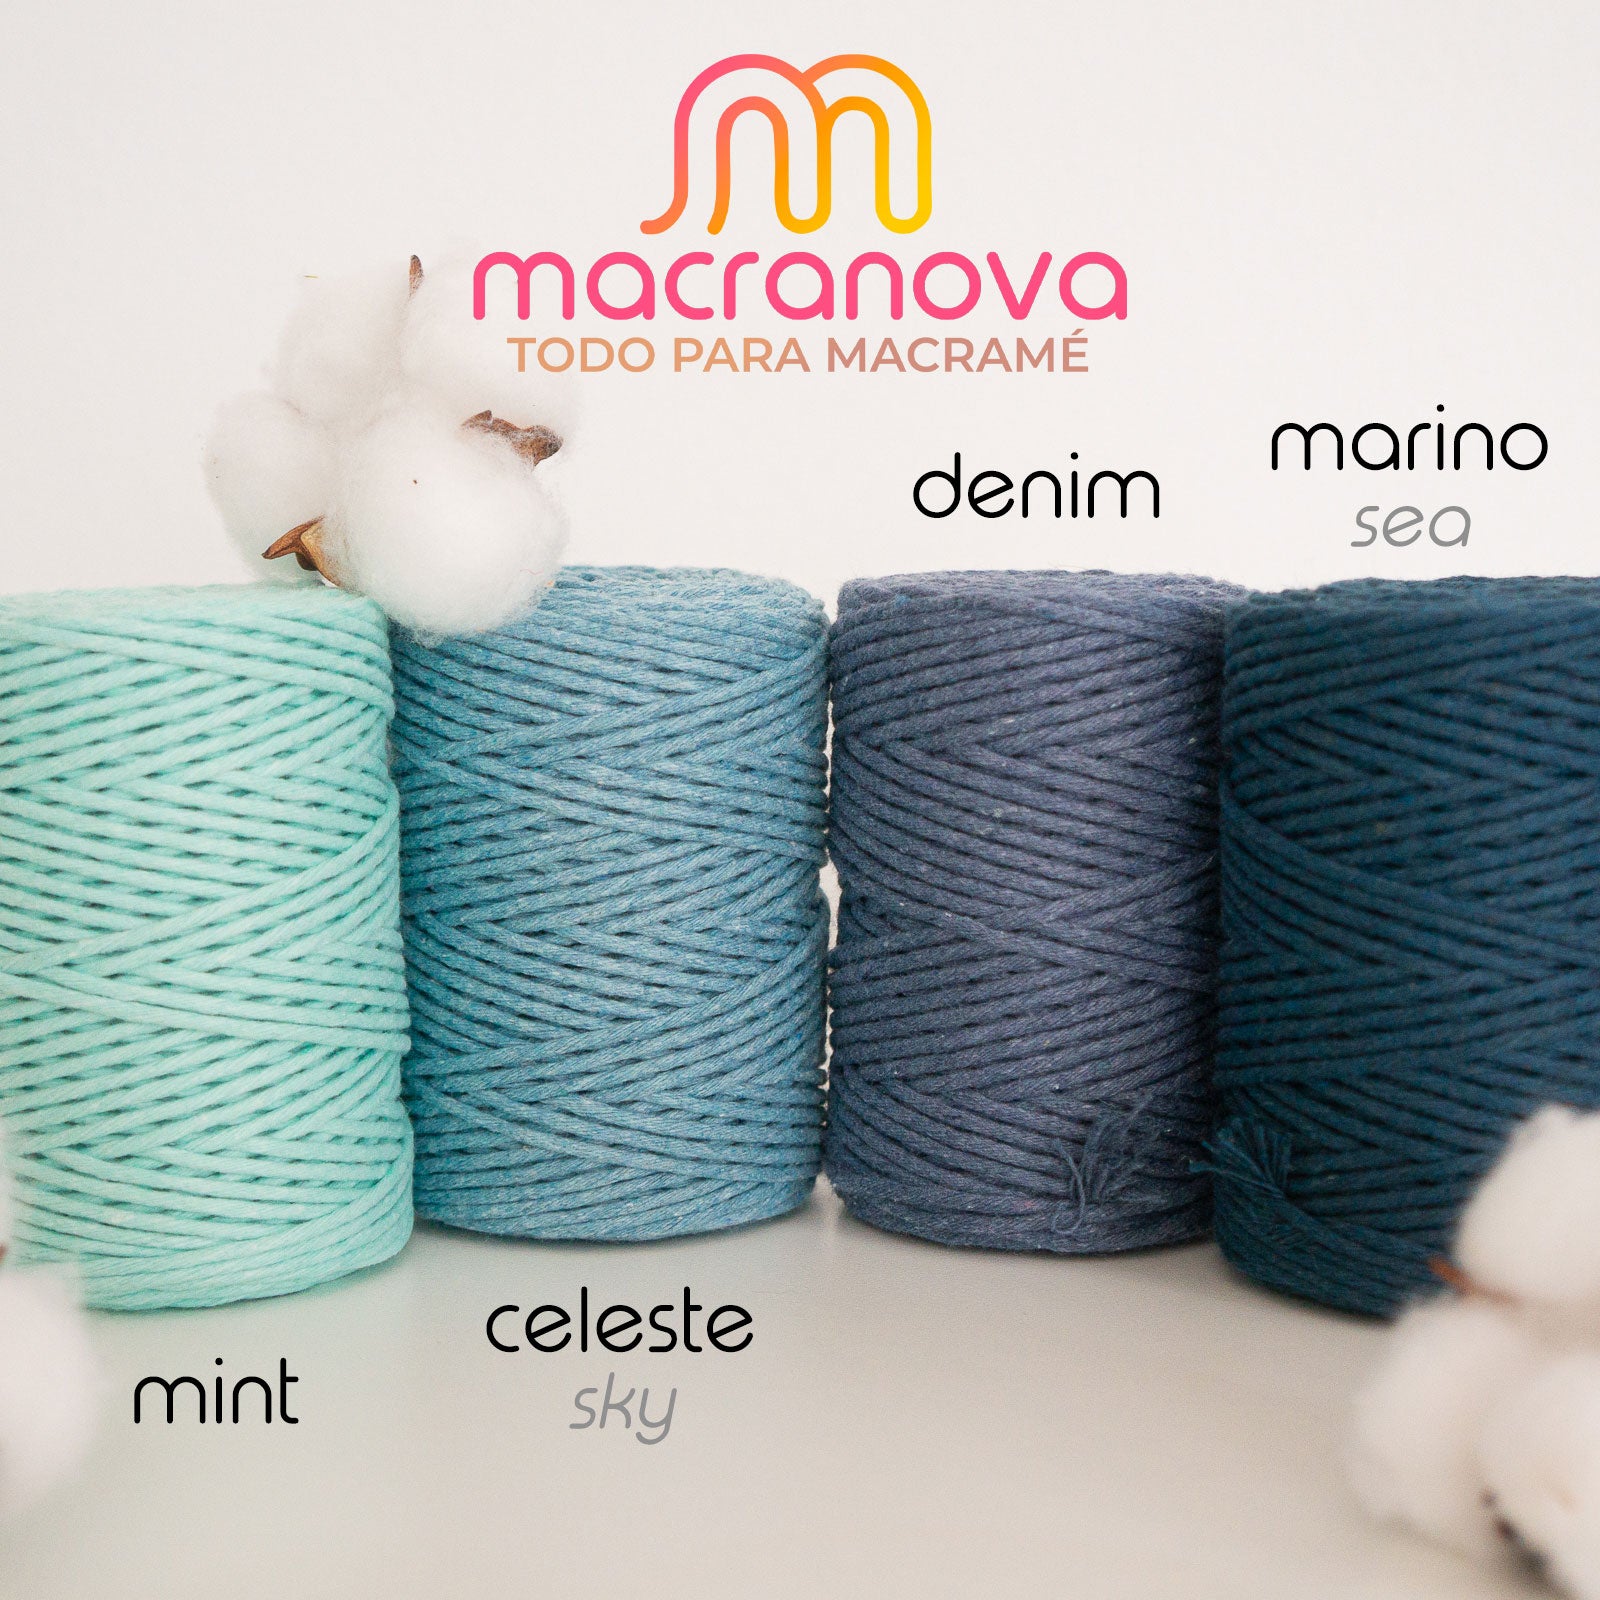 Twisted rope for macramé 2mm - Low prices and variety of colors – Macranova